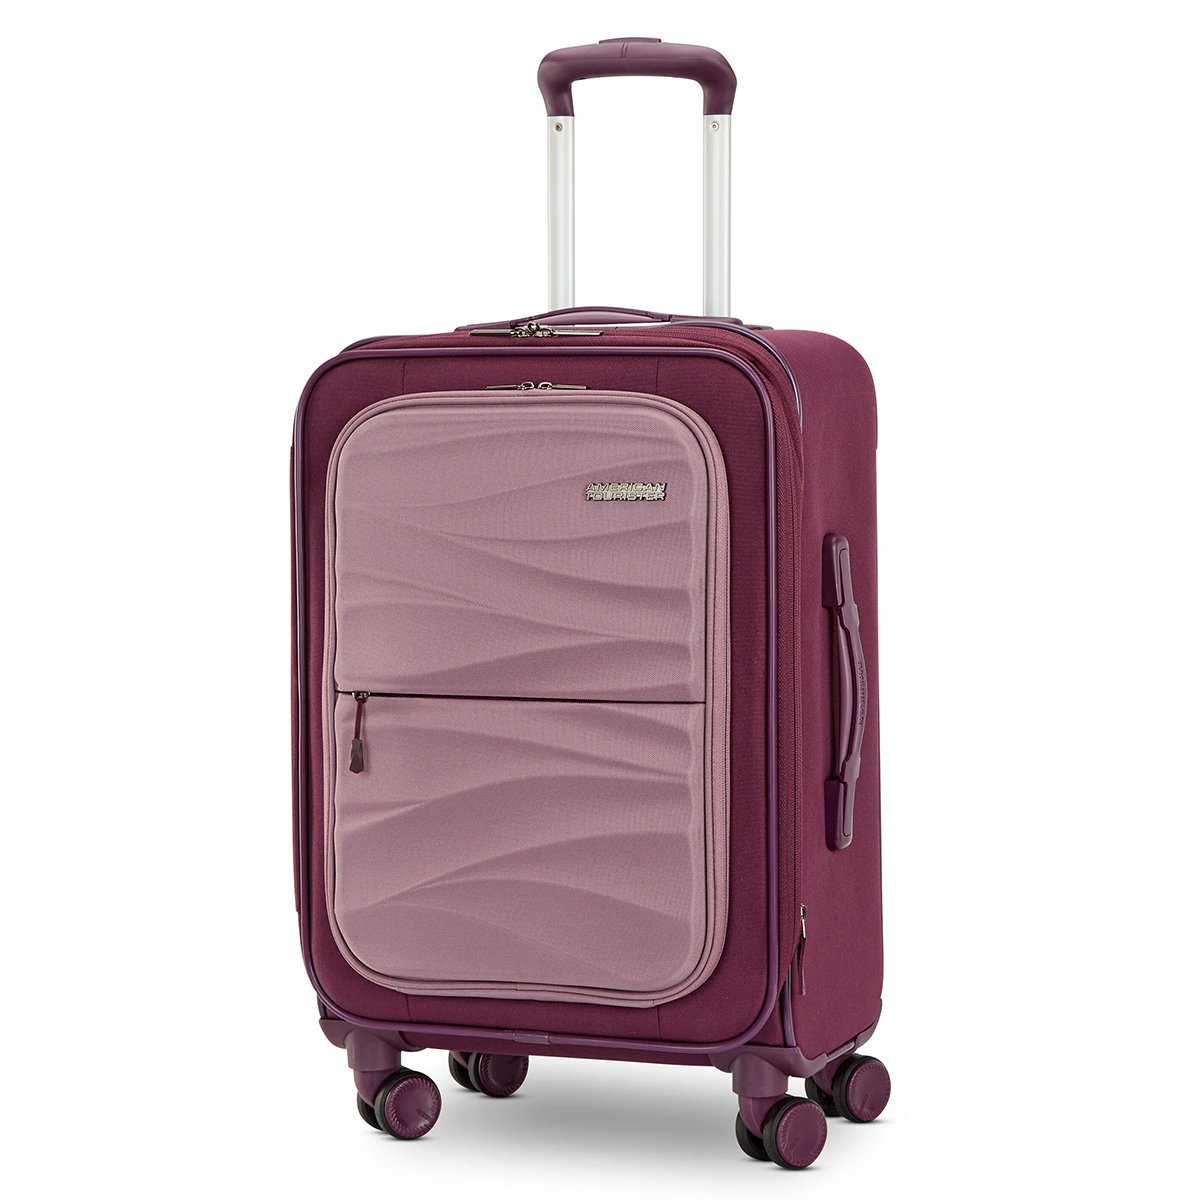 American Tourister(R) Cascade 20in. Carry-On Spinner Luggage